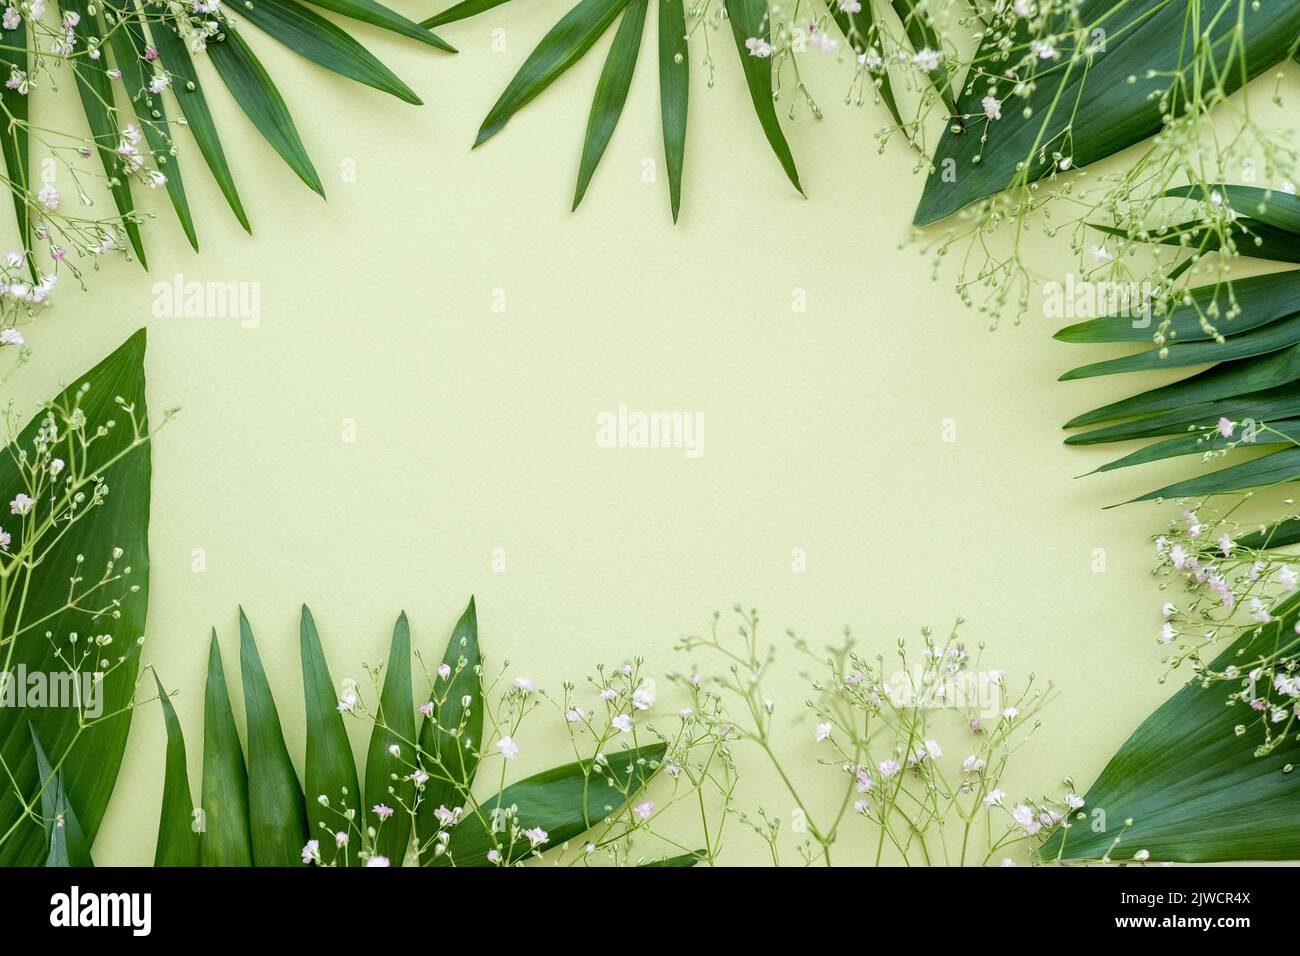 floral frame natural background green leaves decor Stock Photo